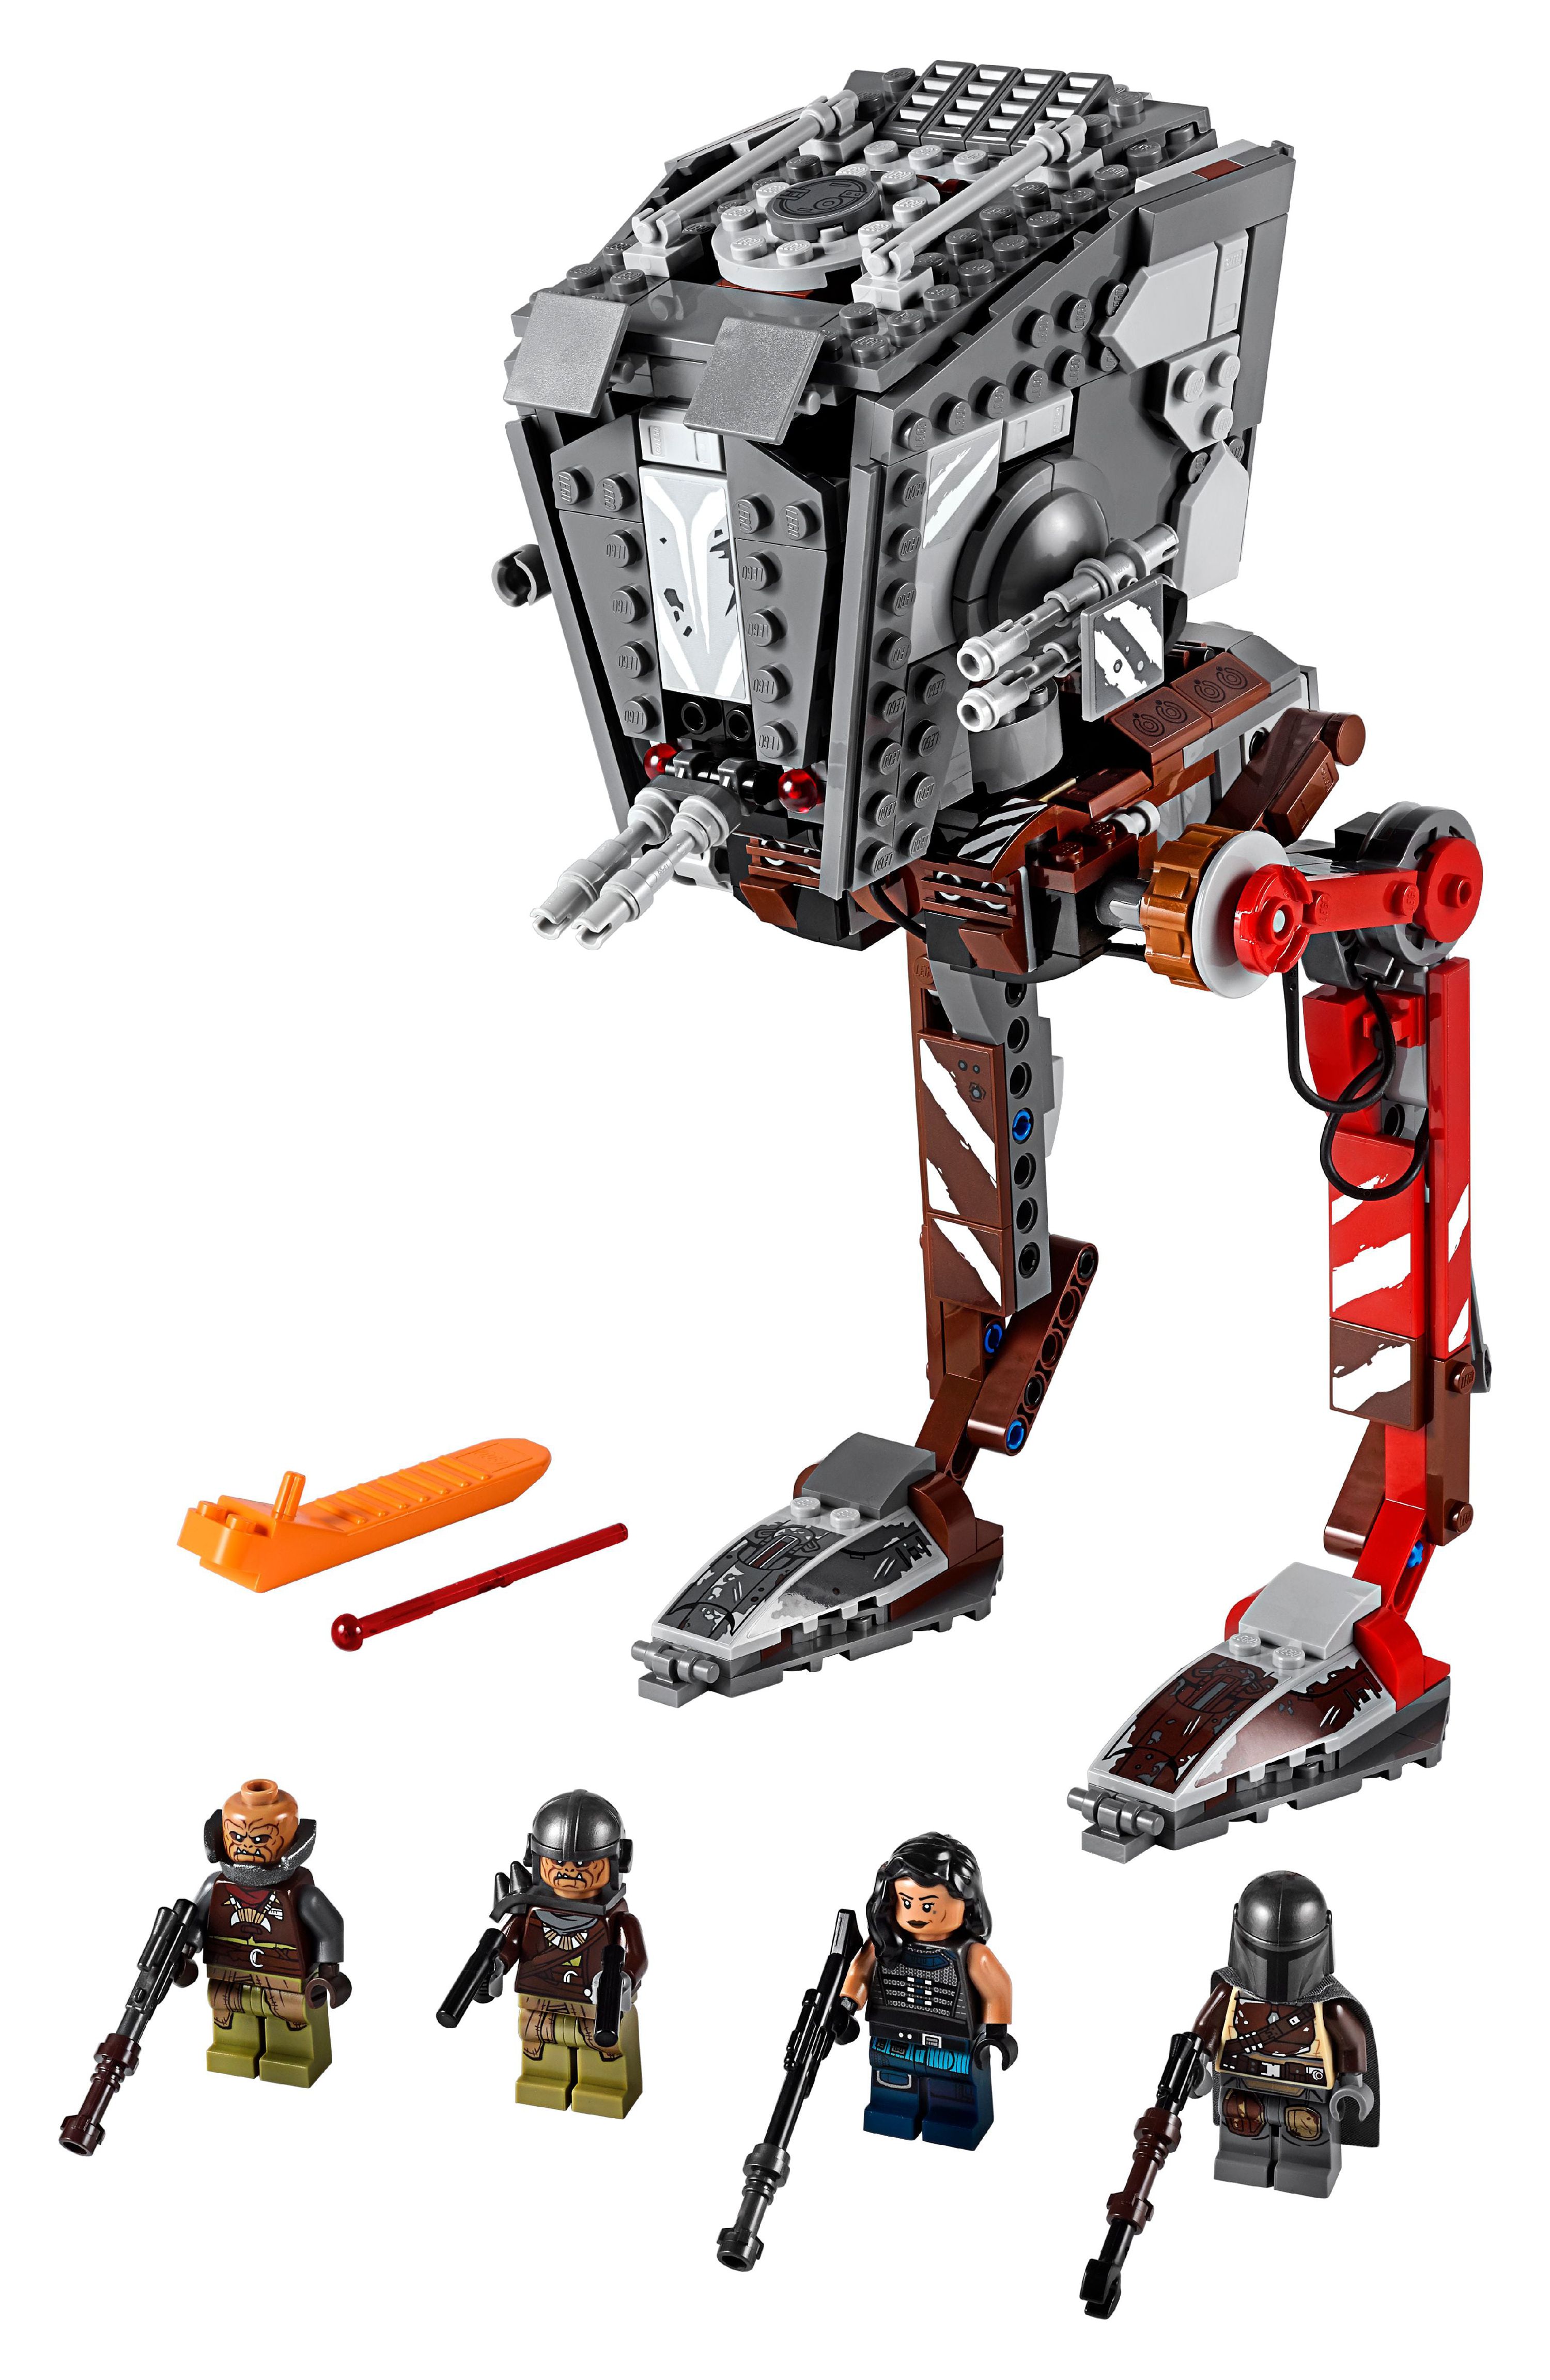 LEGO Star Wars AT-ST Raider 75254 Building Set (540 Pieces) - image 3 of 8